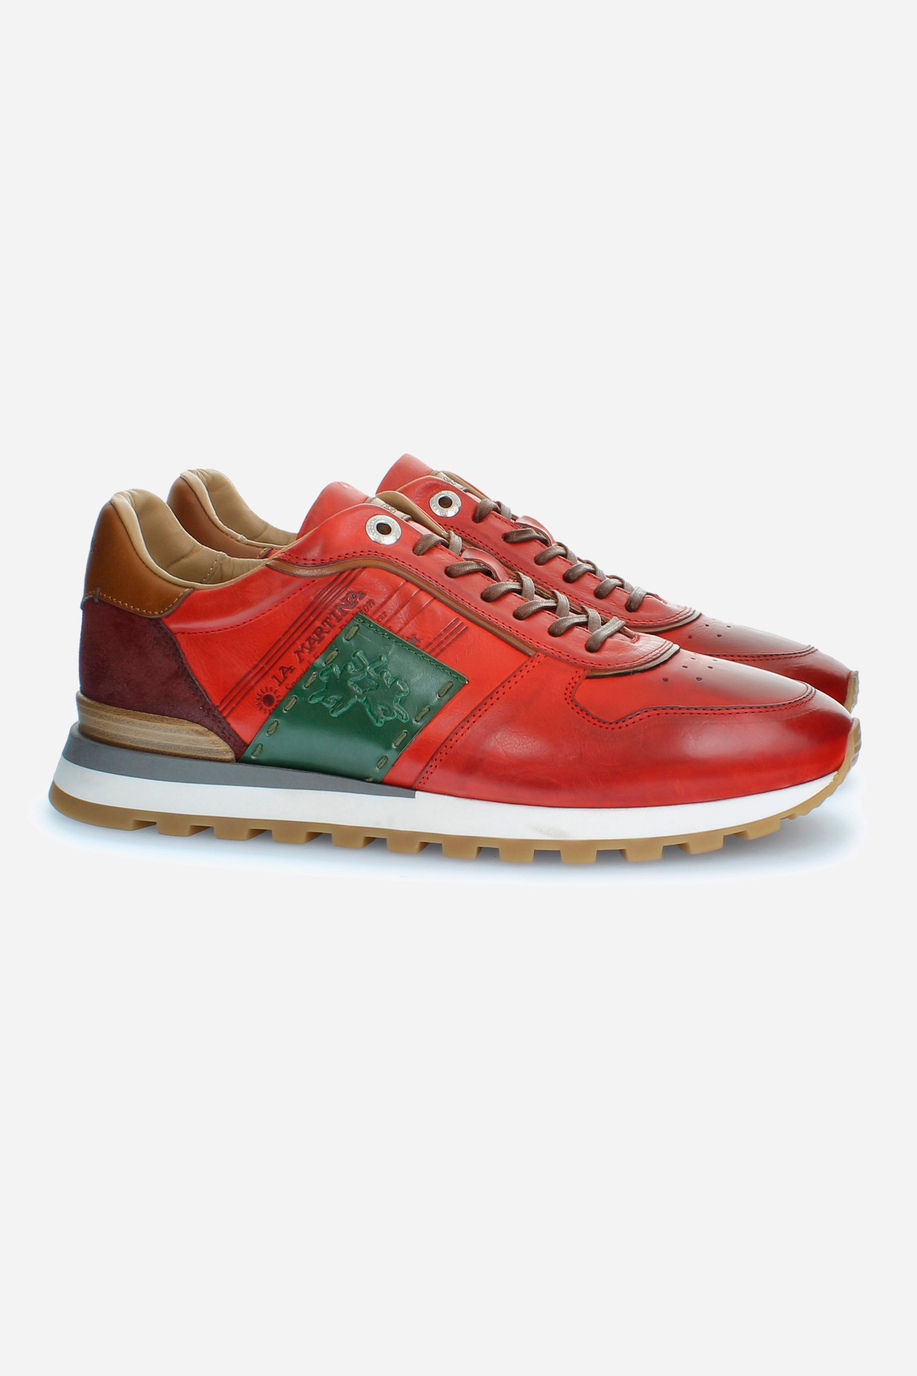 Multi-colour men's trainers in leather - Shoes and Accessories | La Martina - Official Online Shop